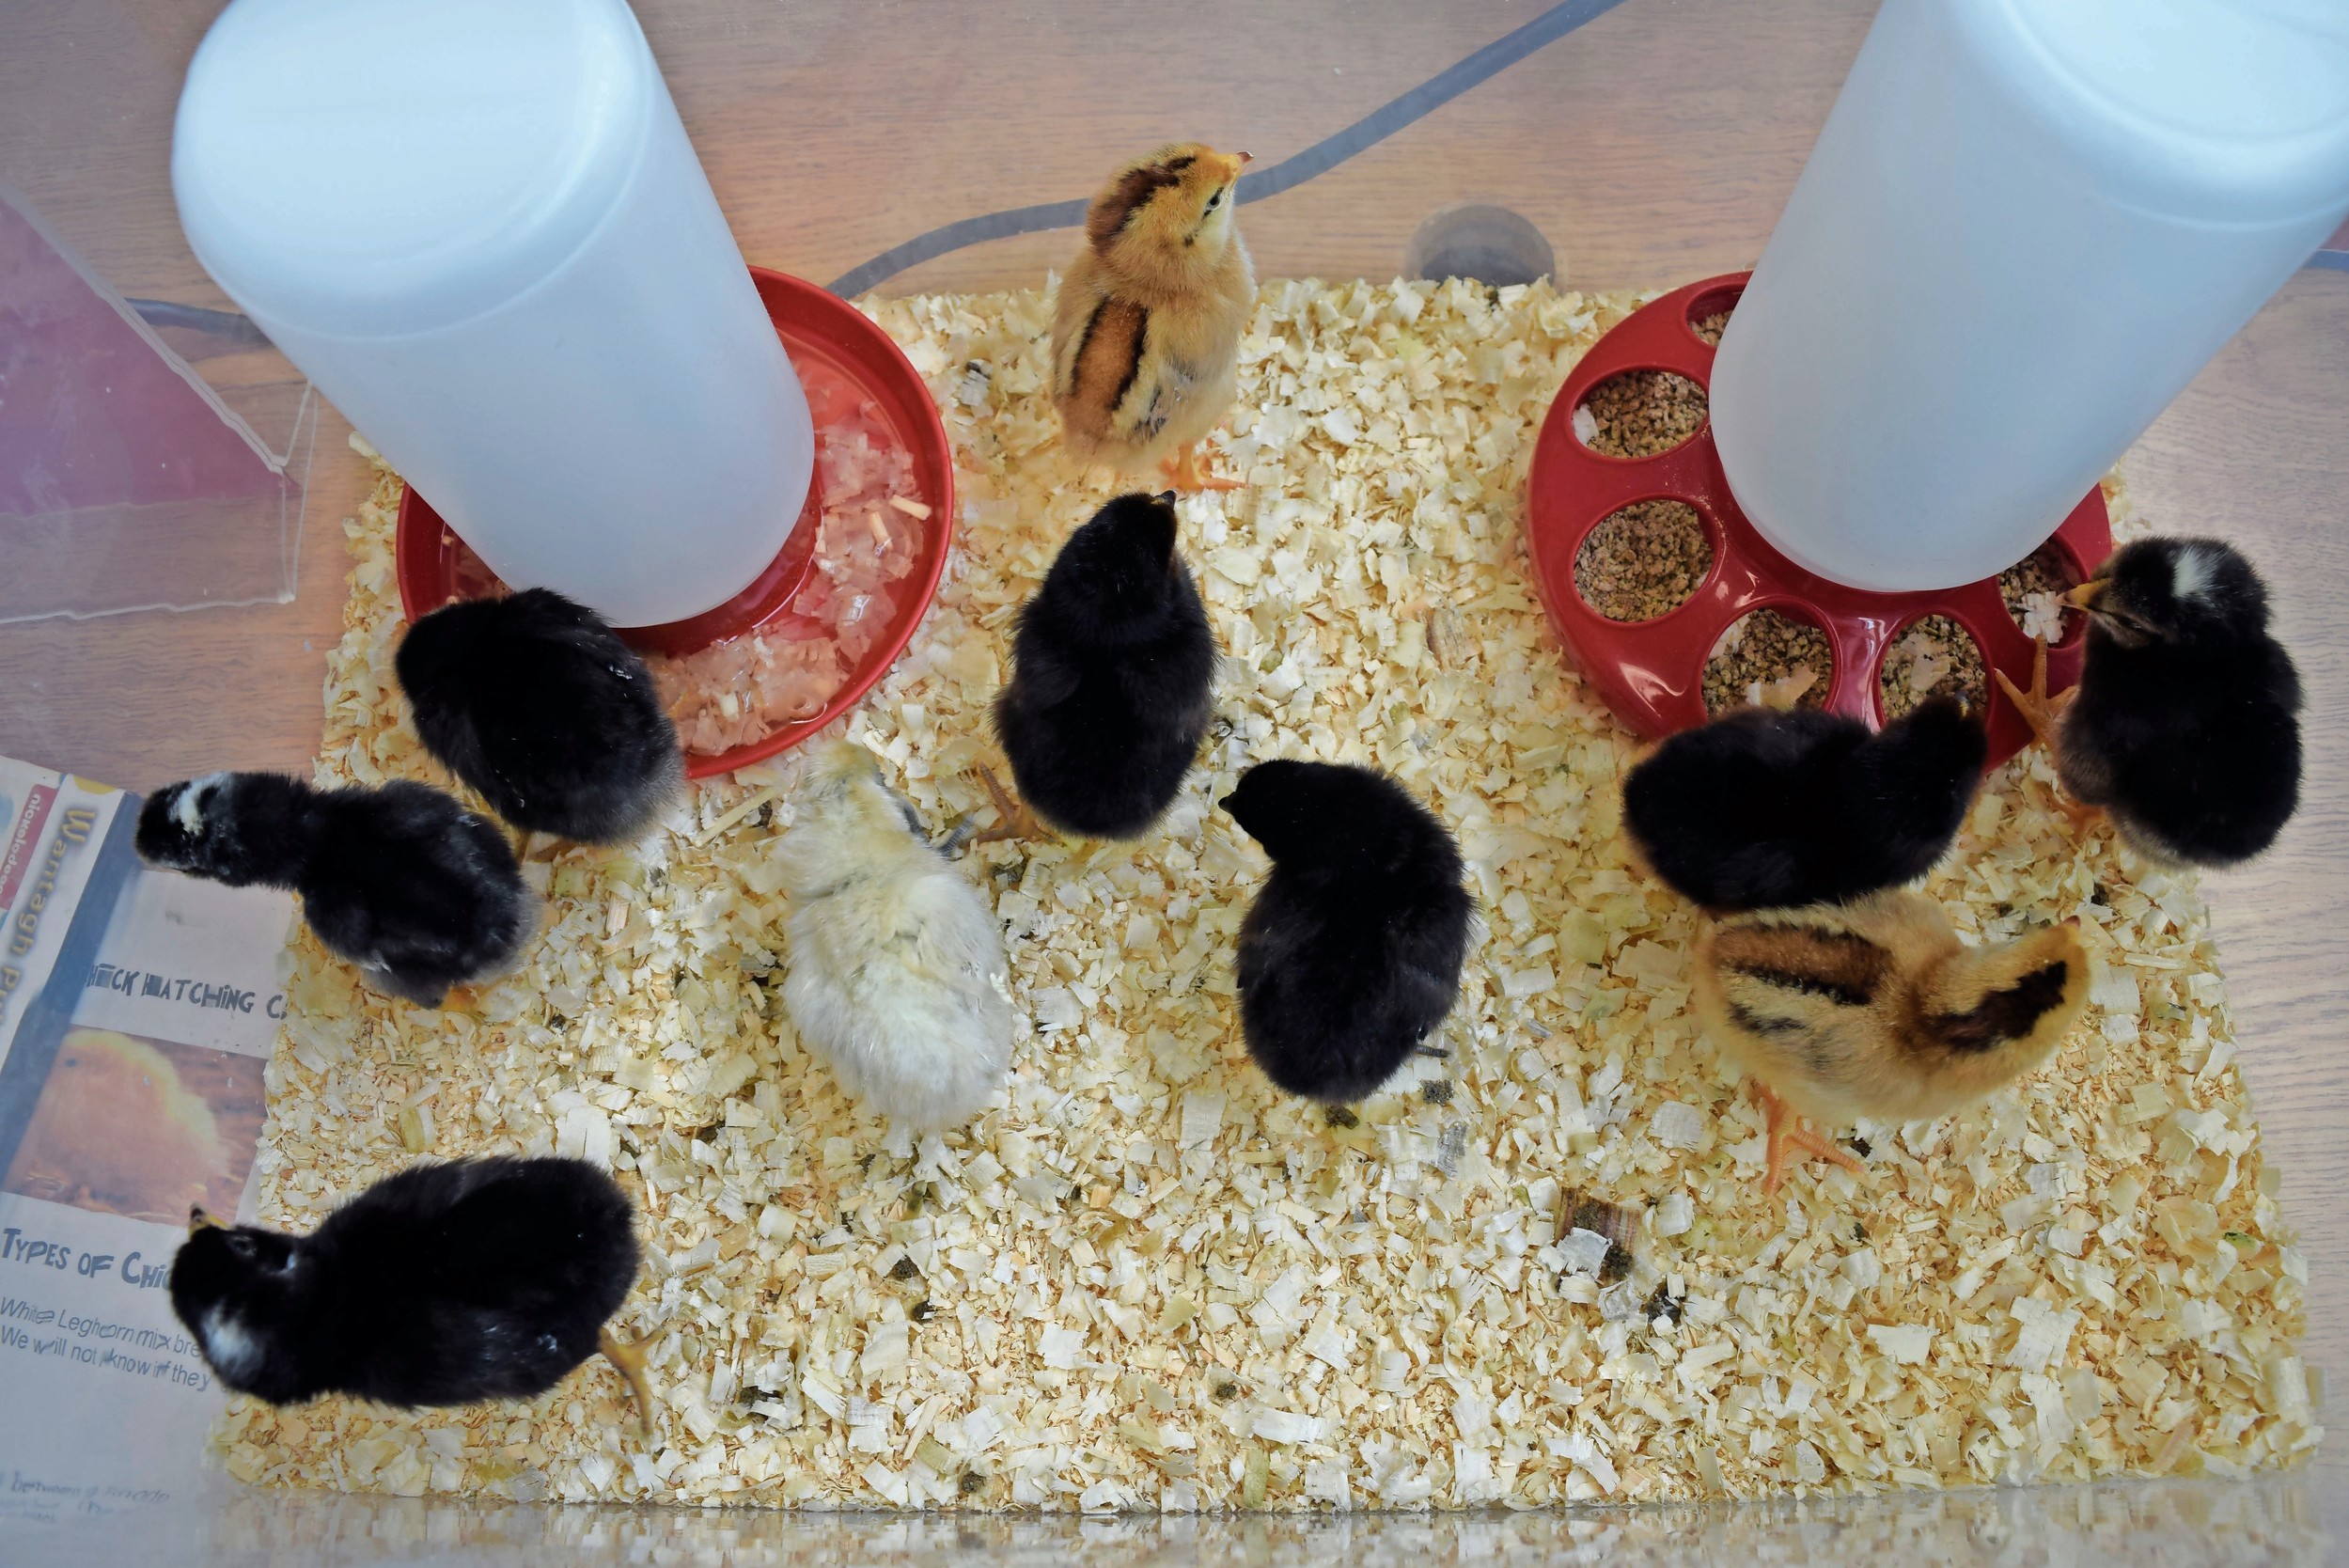 The Cornell Cooperative Extension of Suffolk County brought a dozen eggs to the Wantagh Public Library — 10 of which hatched last week.